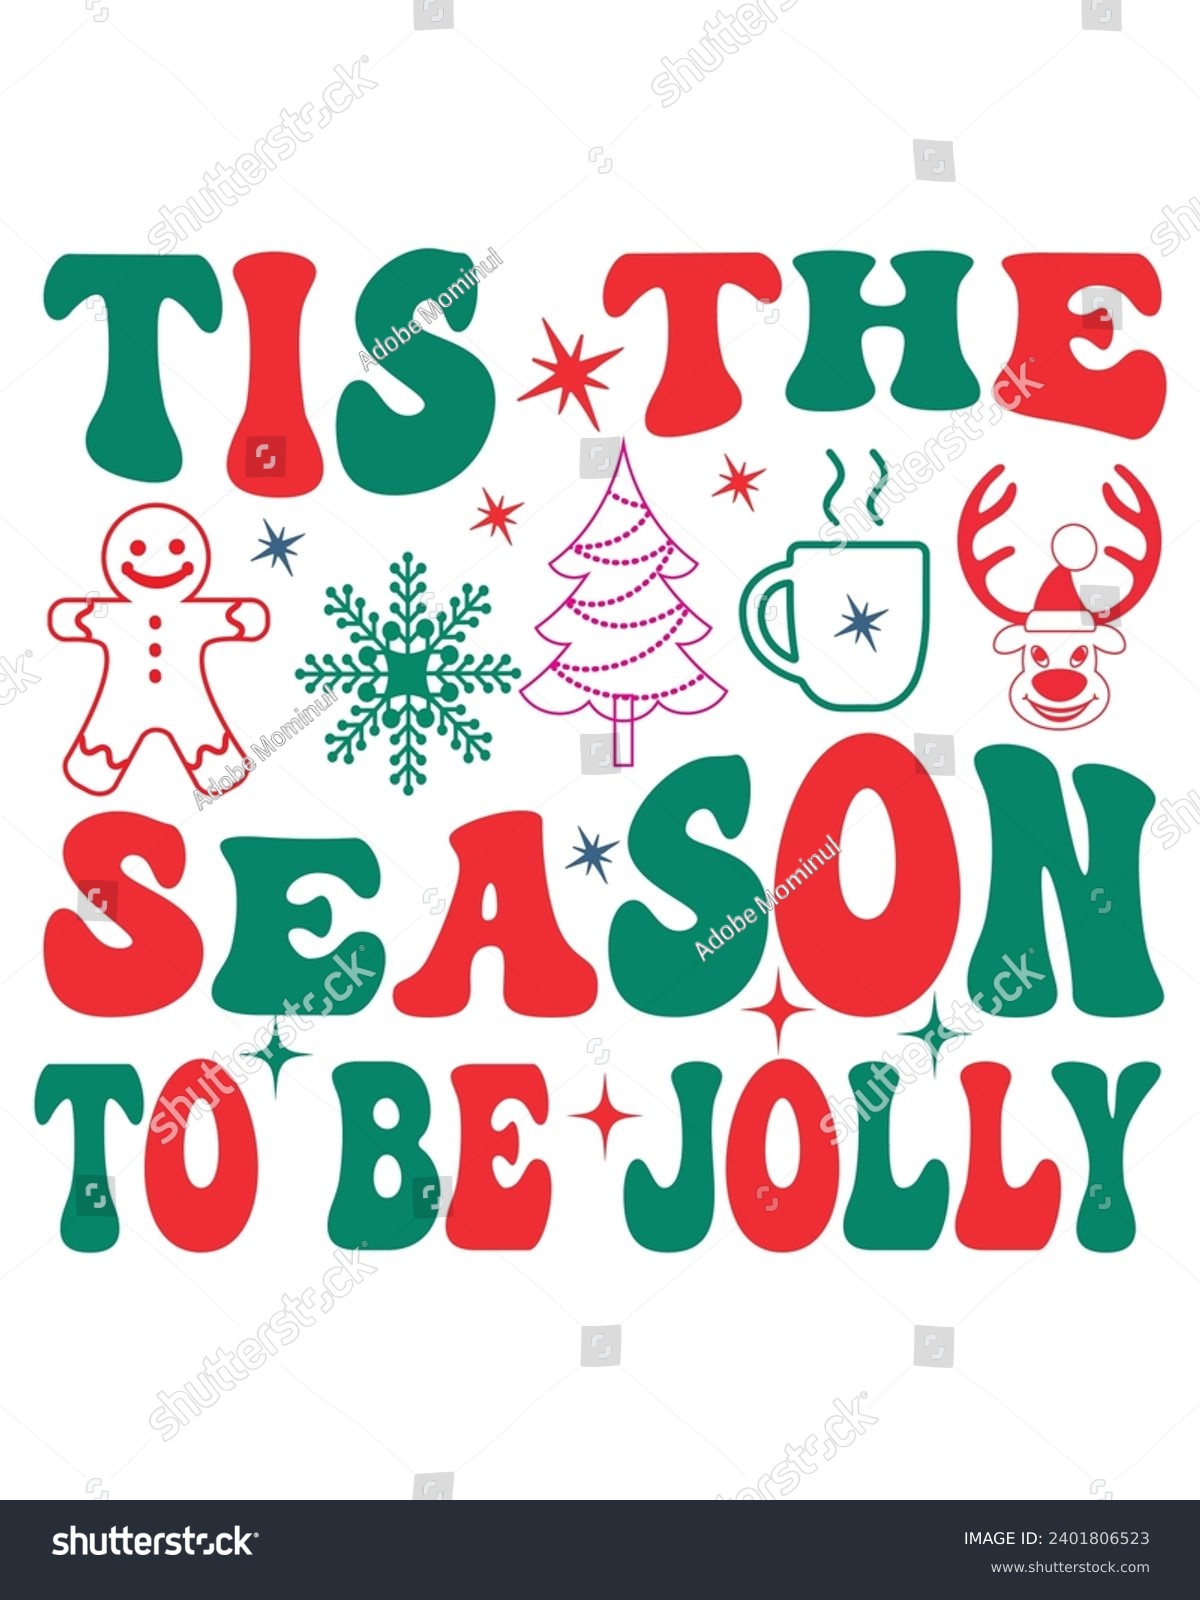 SVG of Tis The Season To Be A Jolly Retro, Svg,Christmas Svg,Funny Holiday Quote,New Year Quotes,Winter Quotes,Holiday Svg,Retro Christmas T-shirt, Funny Christmas Quotes,Merry Christmas Saying, svg